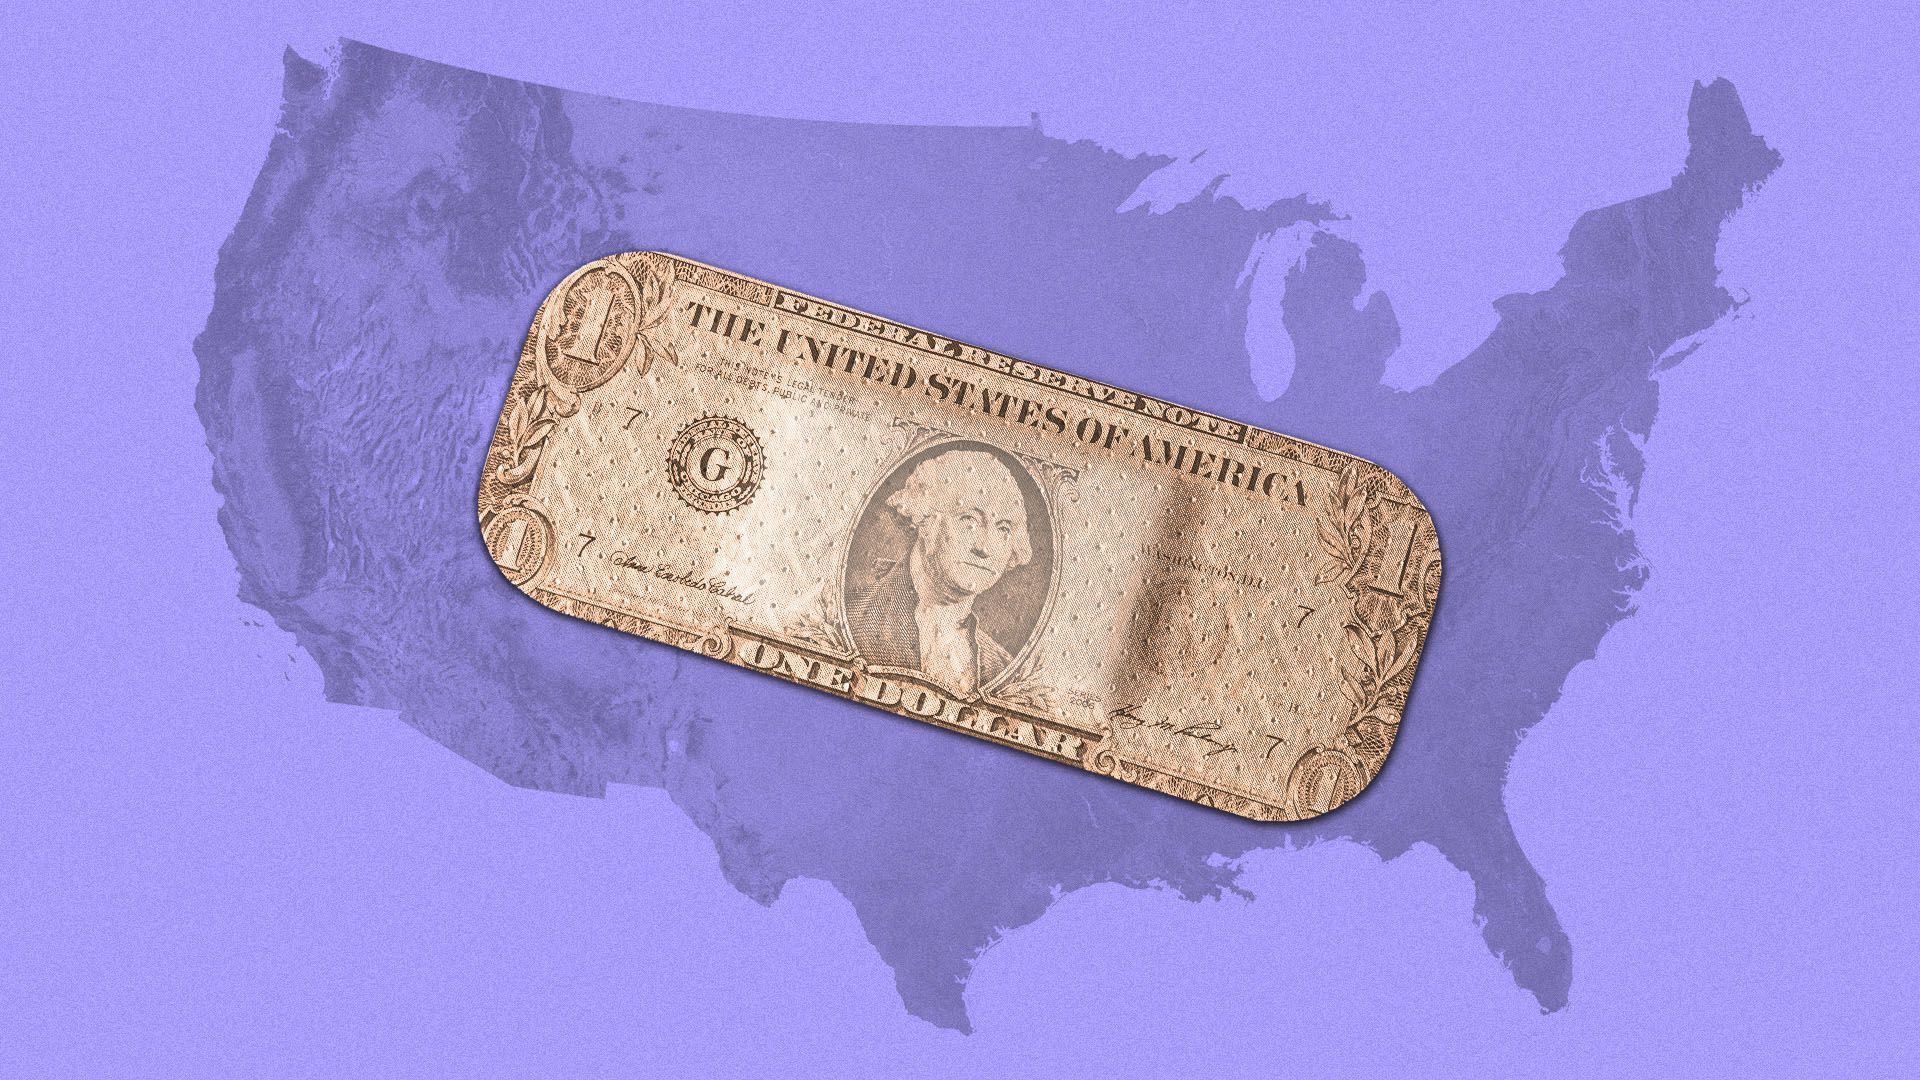 An illustration of a band-aid made of money covering the U.S.